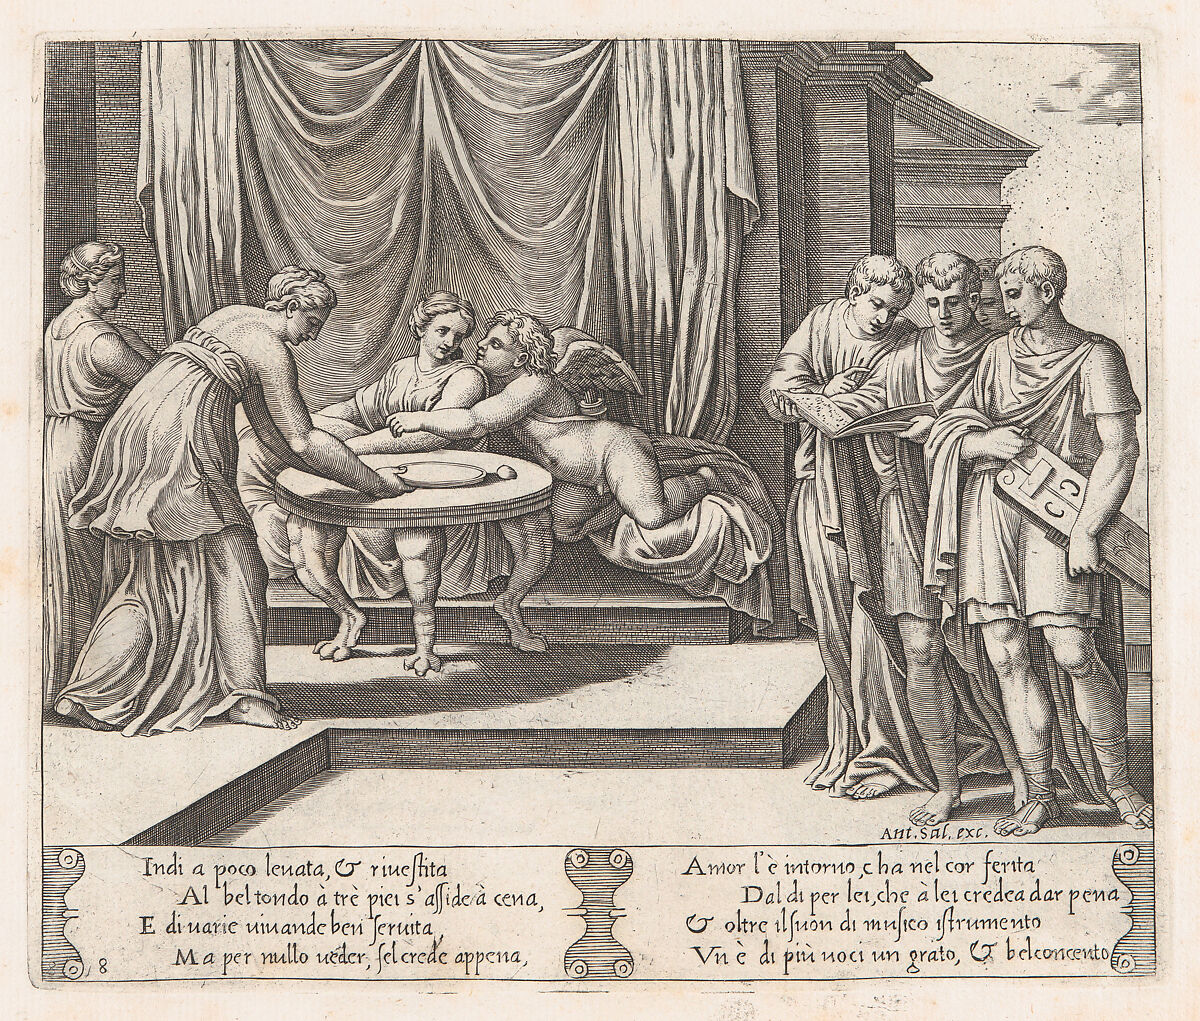 Plate 8: Psyche seated at a table attended by invisible servants, as Cupid rests his head on her shoulder, at right four men standing singing from an open book, one playing a lute, from "The Story of Cupid and Psyche as told by Apuleius", Master of the Die (Italian, active Rome, ca. 1530–60), Engraving 